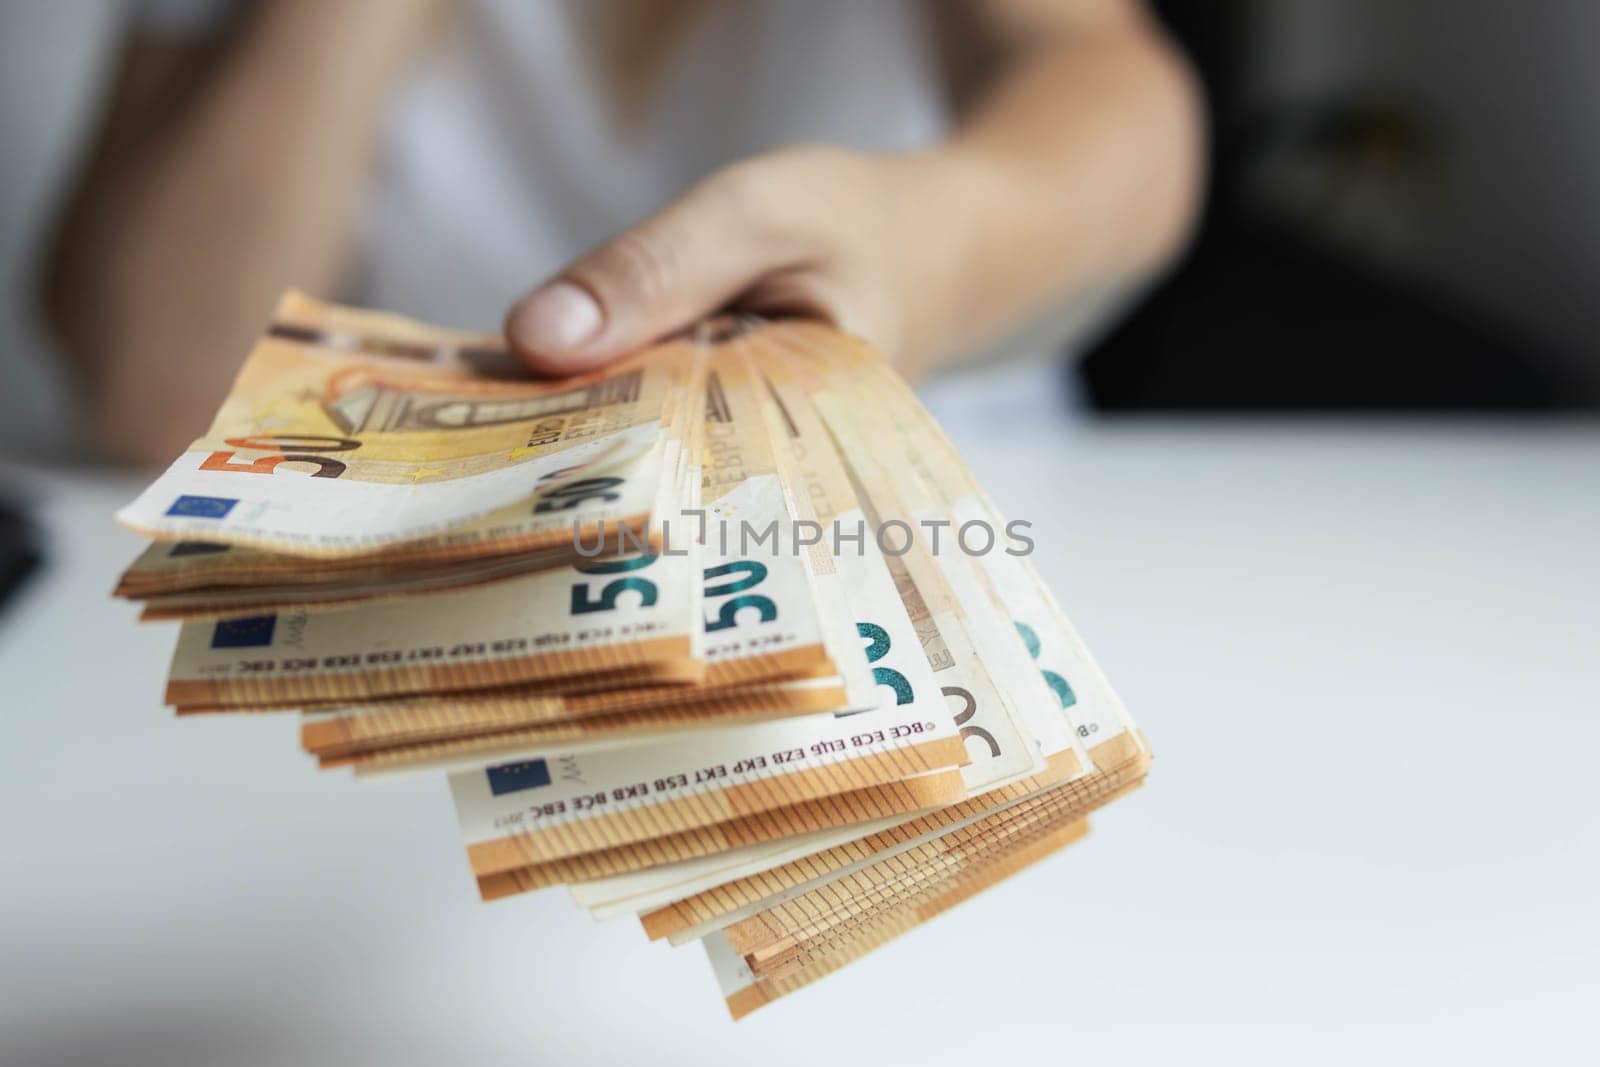 a girl in a white t-shirt stretches her hand forward holding euro 50 banknotes in her hand close-up focus on money background blurred by PopOff